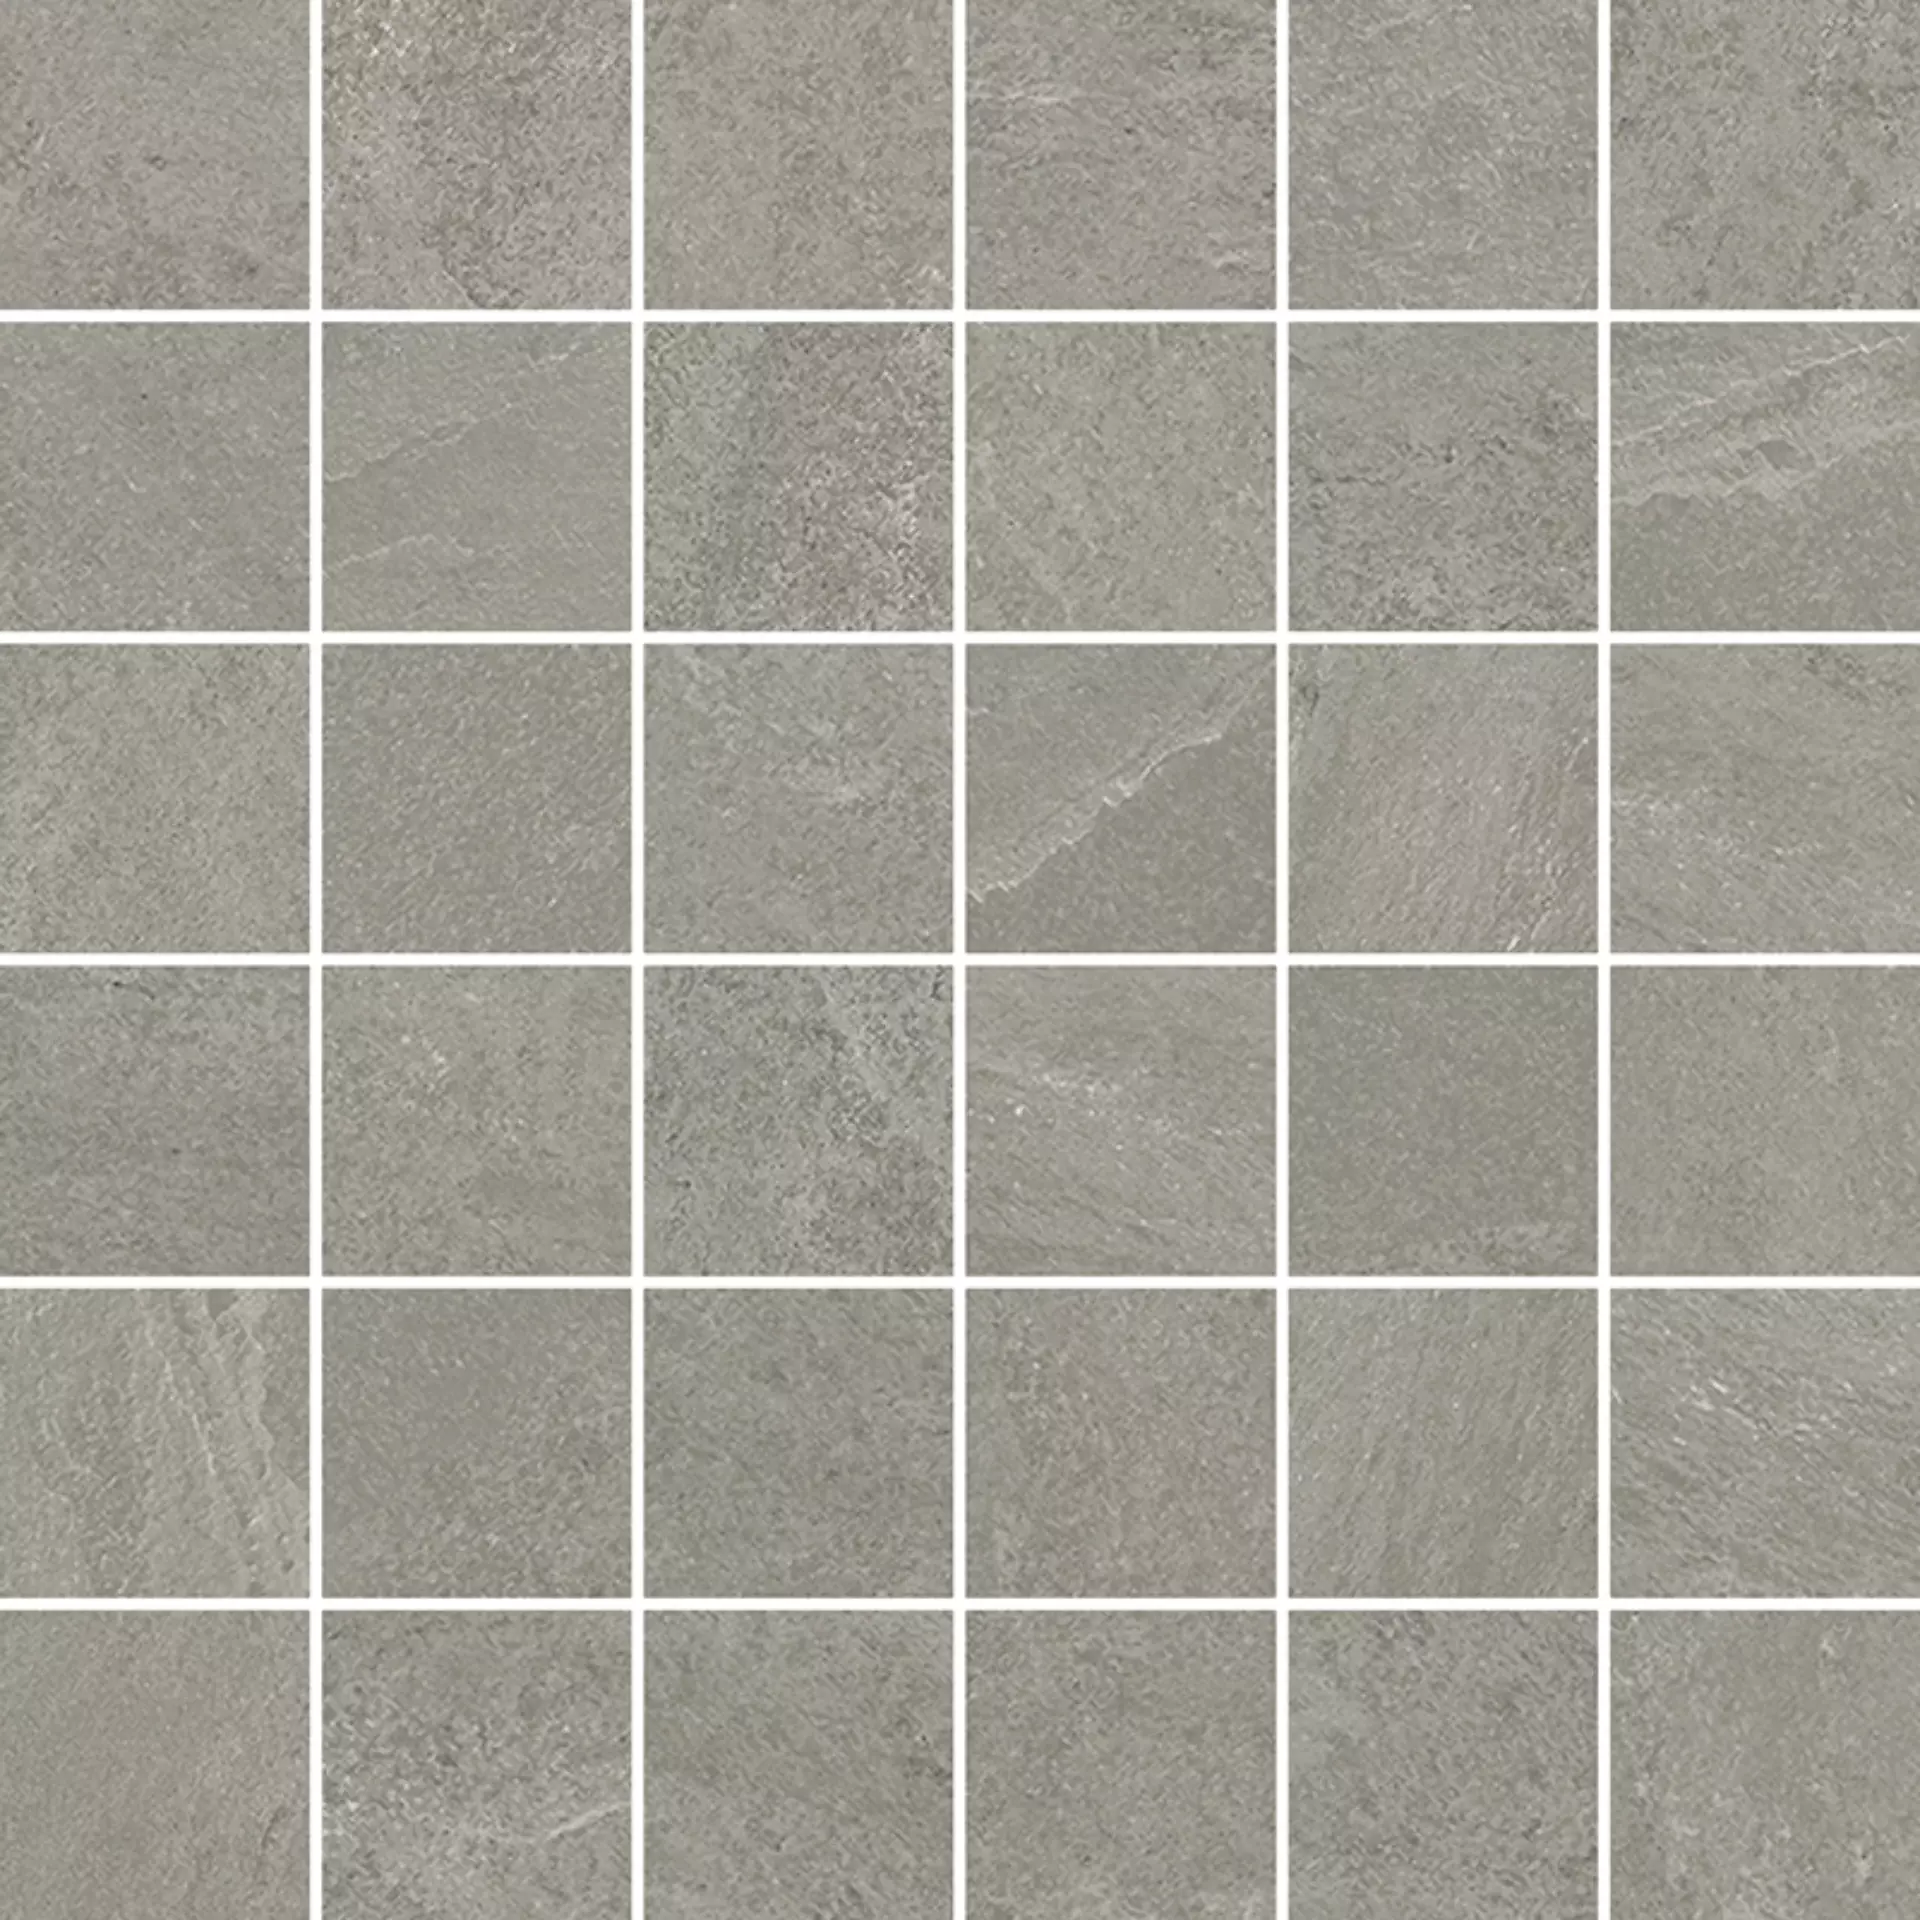 Novabell Norgestone Light Grey Naturale Mosaic 5x5 NST115N 30x30cm